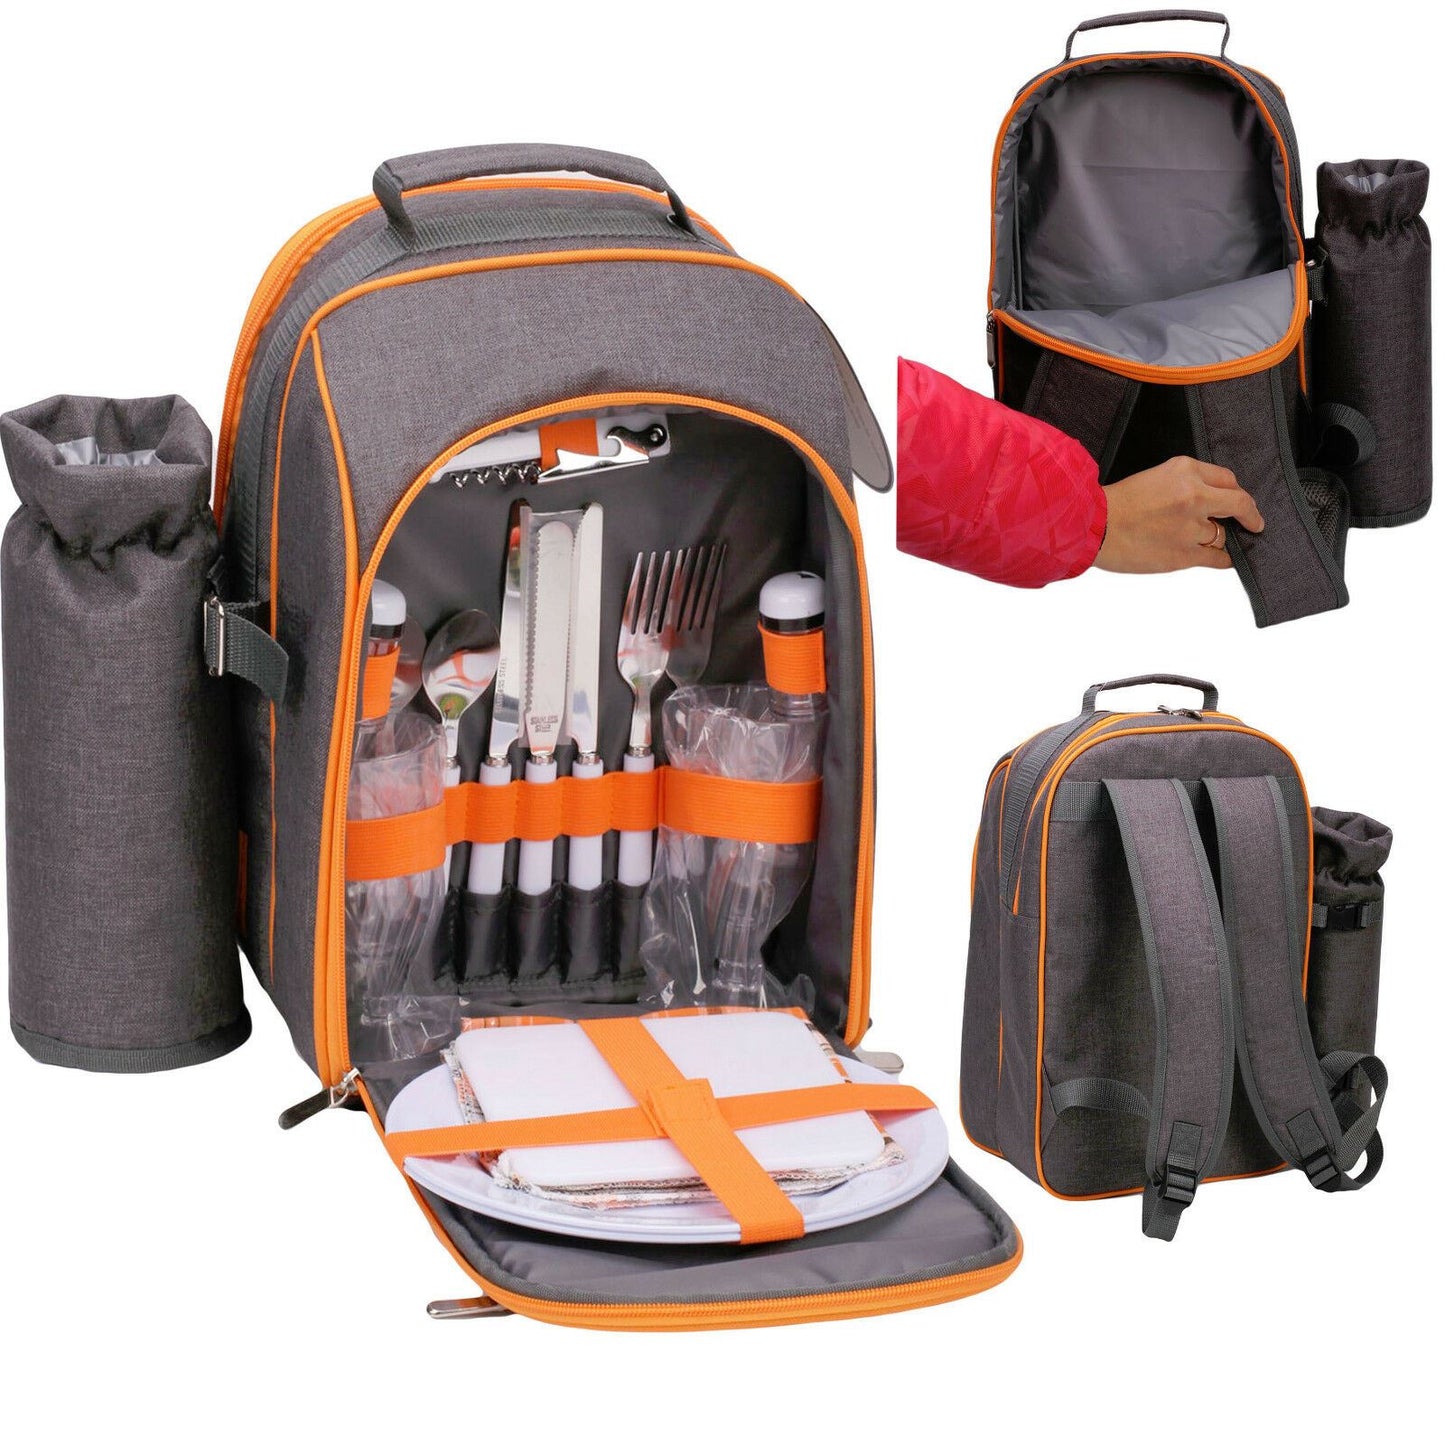 2 Person Picnic Cooler Bag With Accessories by GEEZY - UKBuyZone